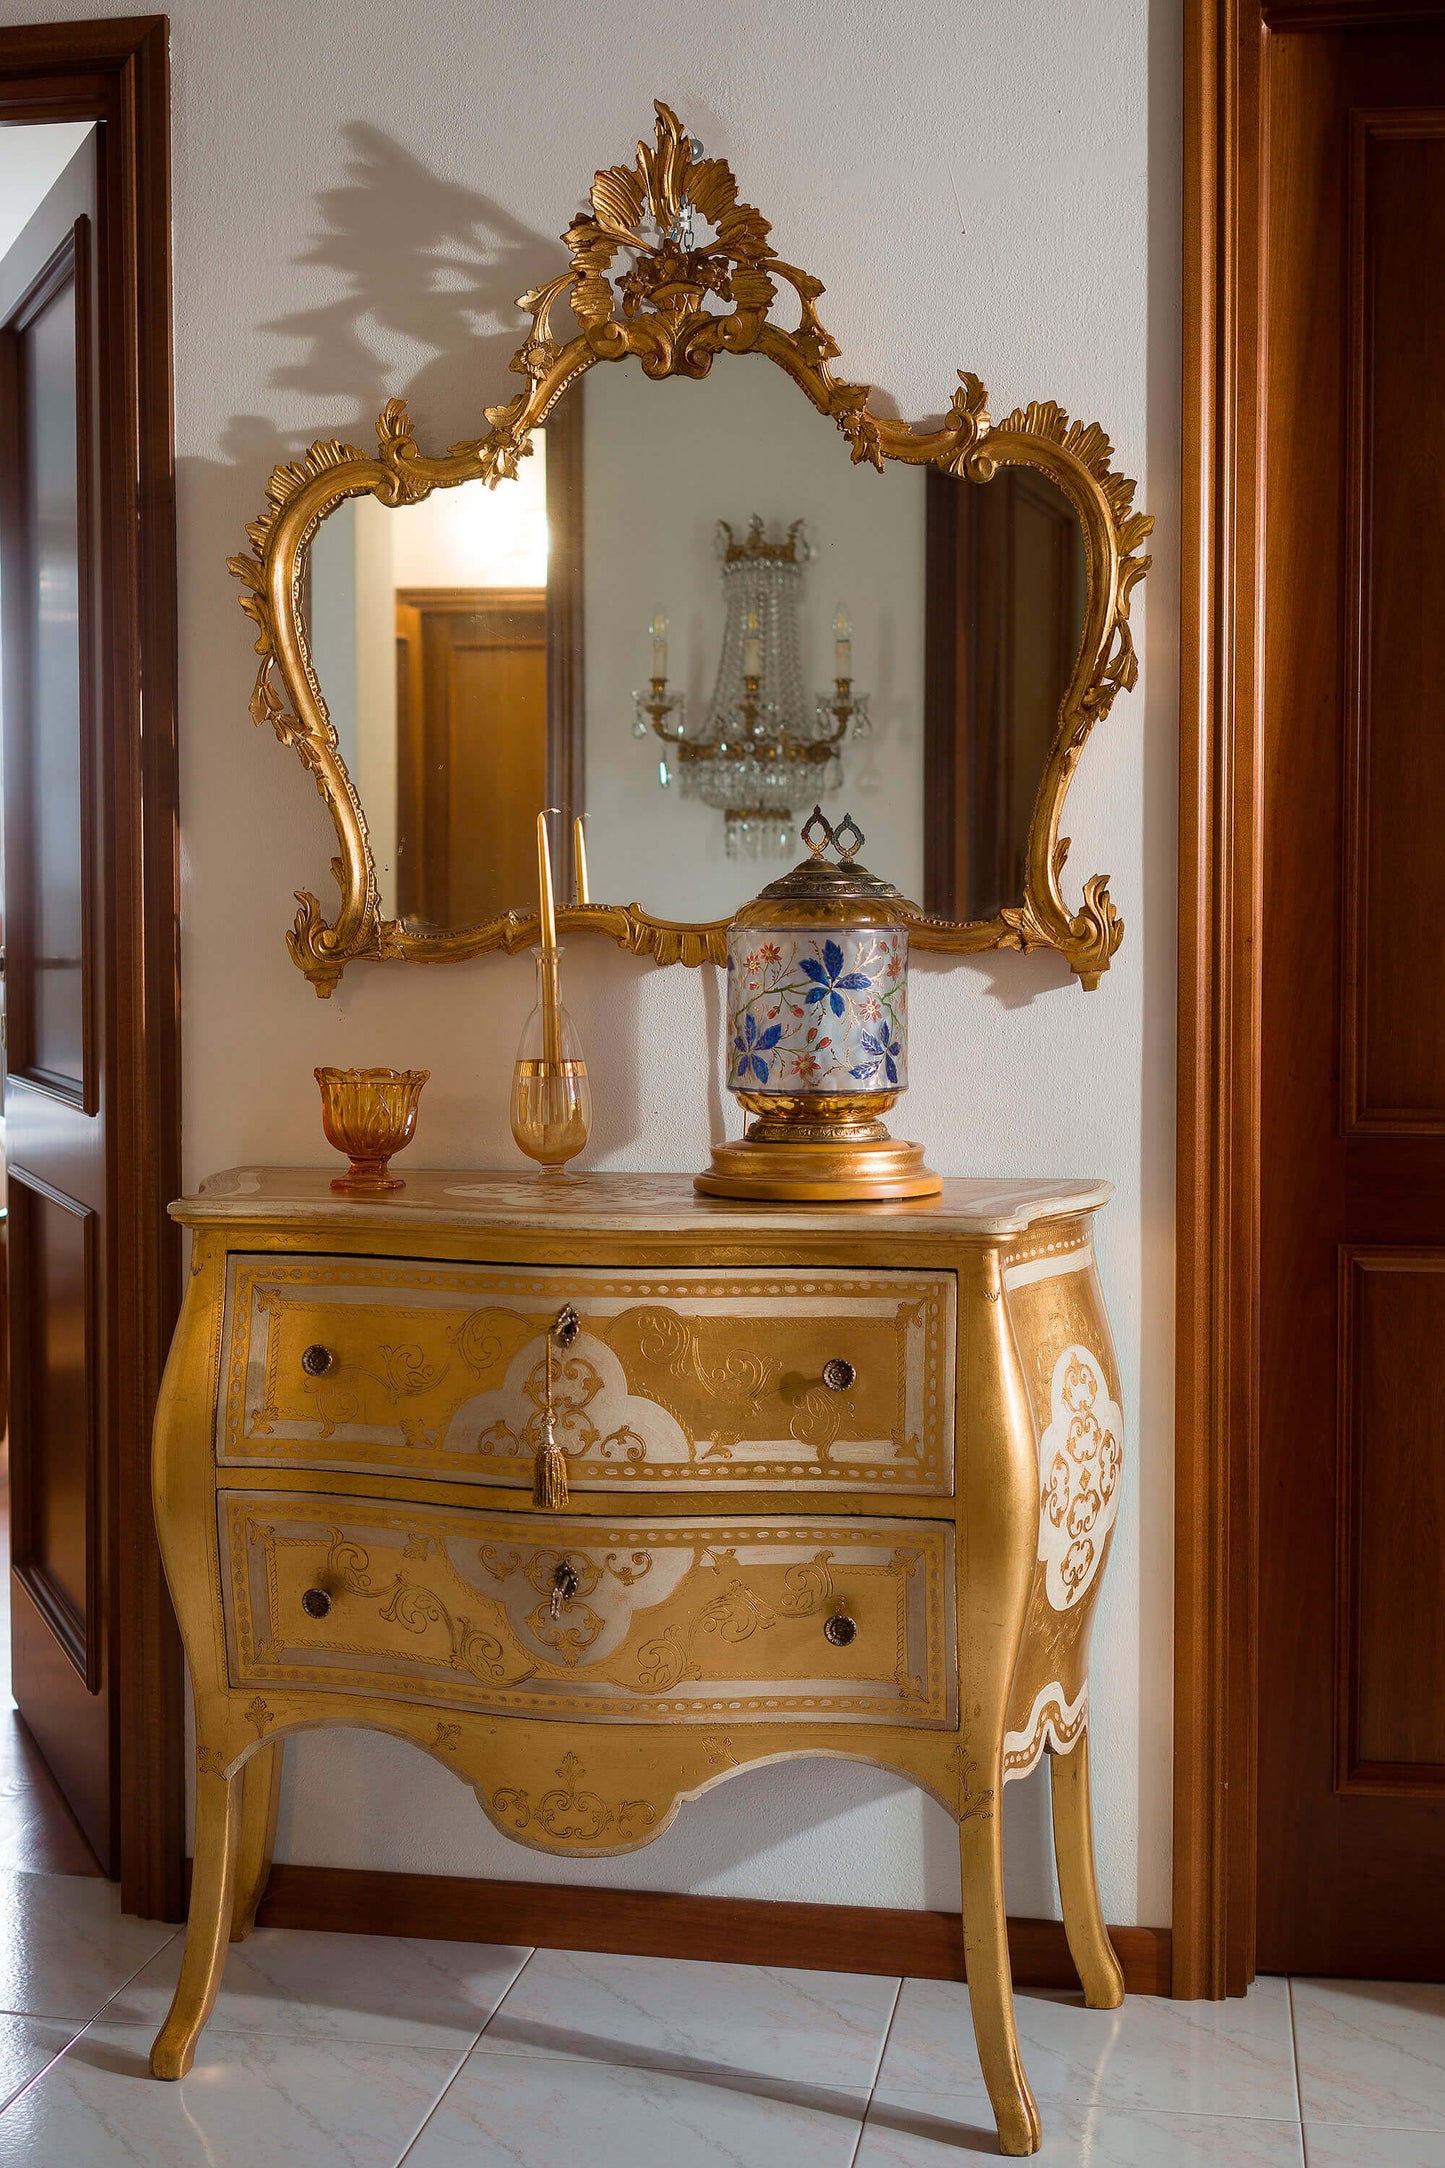 Louis XV style mirror (Rococò), in carved and gilded wood